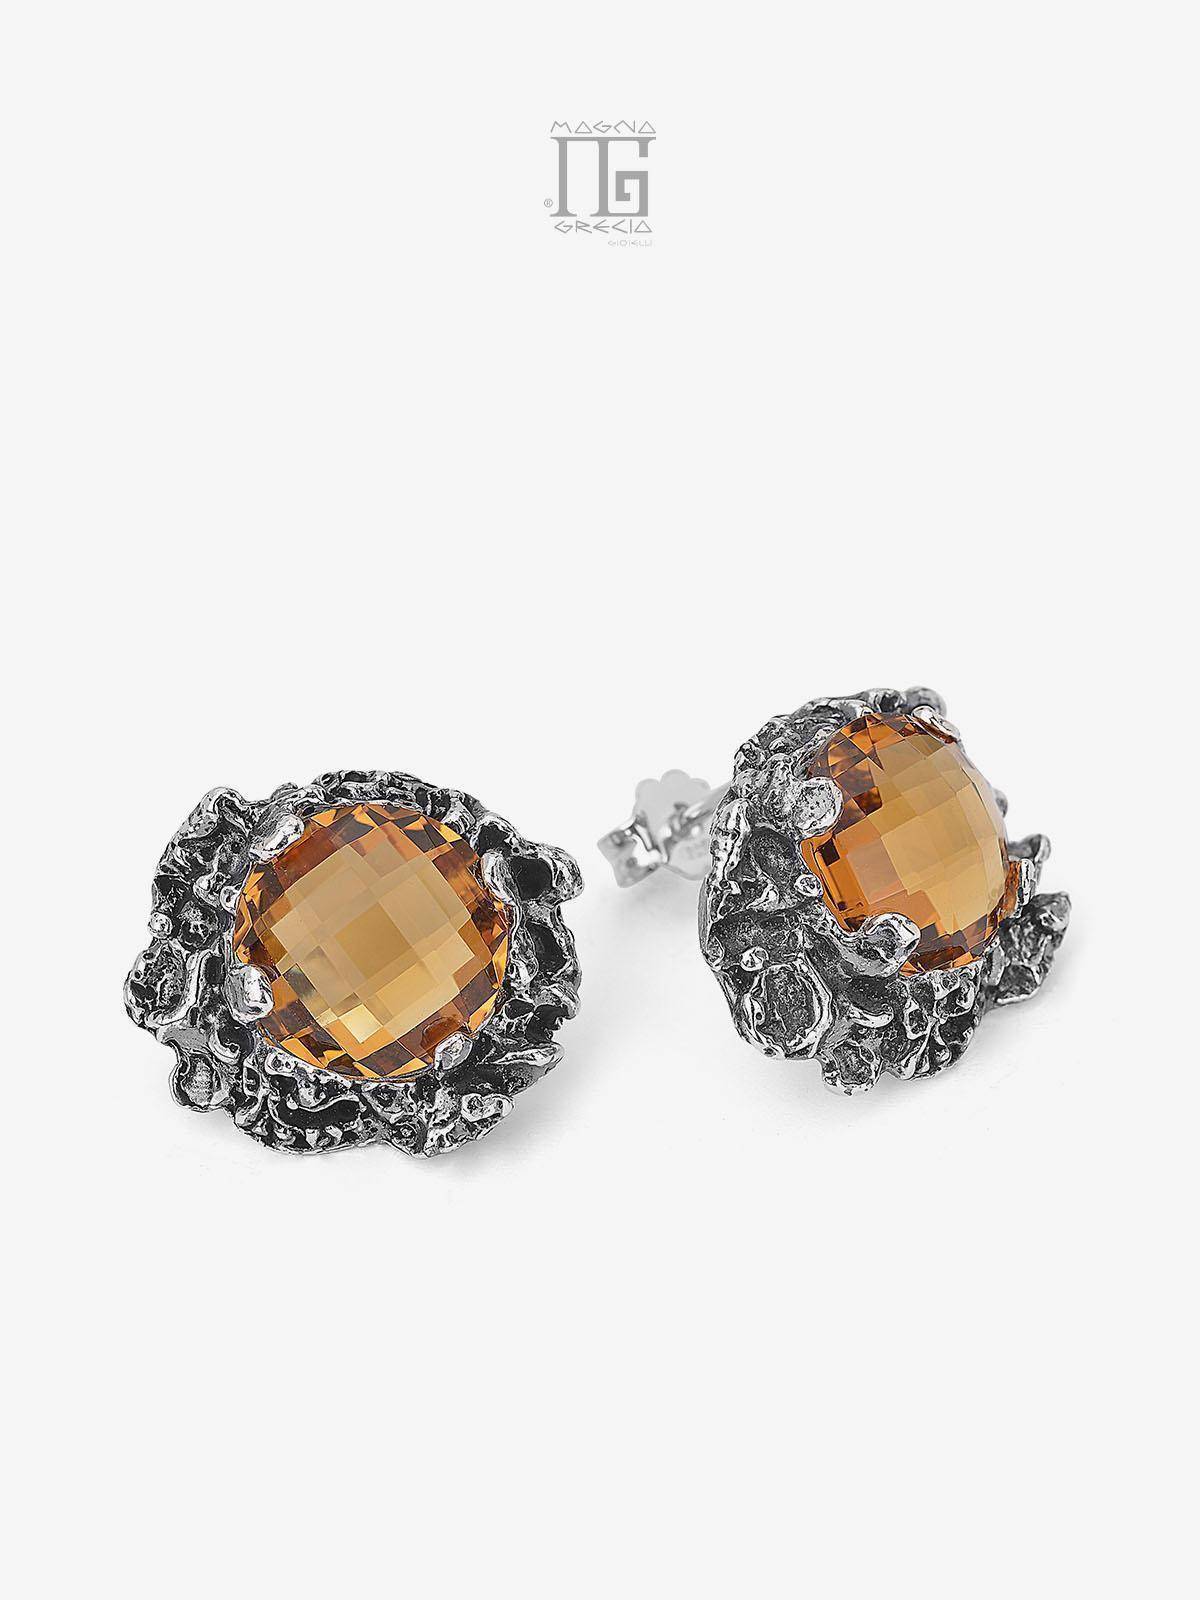 Silver earrings with Apotropaic Mask and Yellow Topaz-colored hydrothermal stone Cod. MGK 4184 V